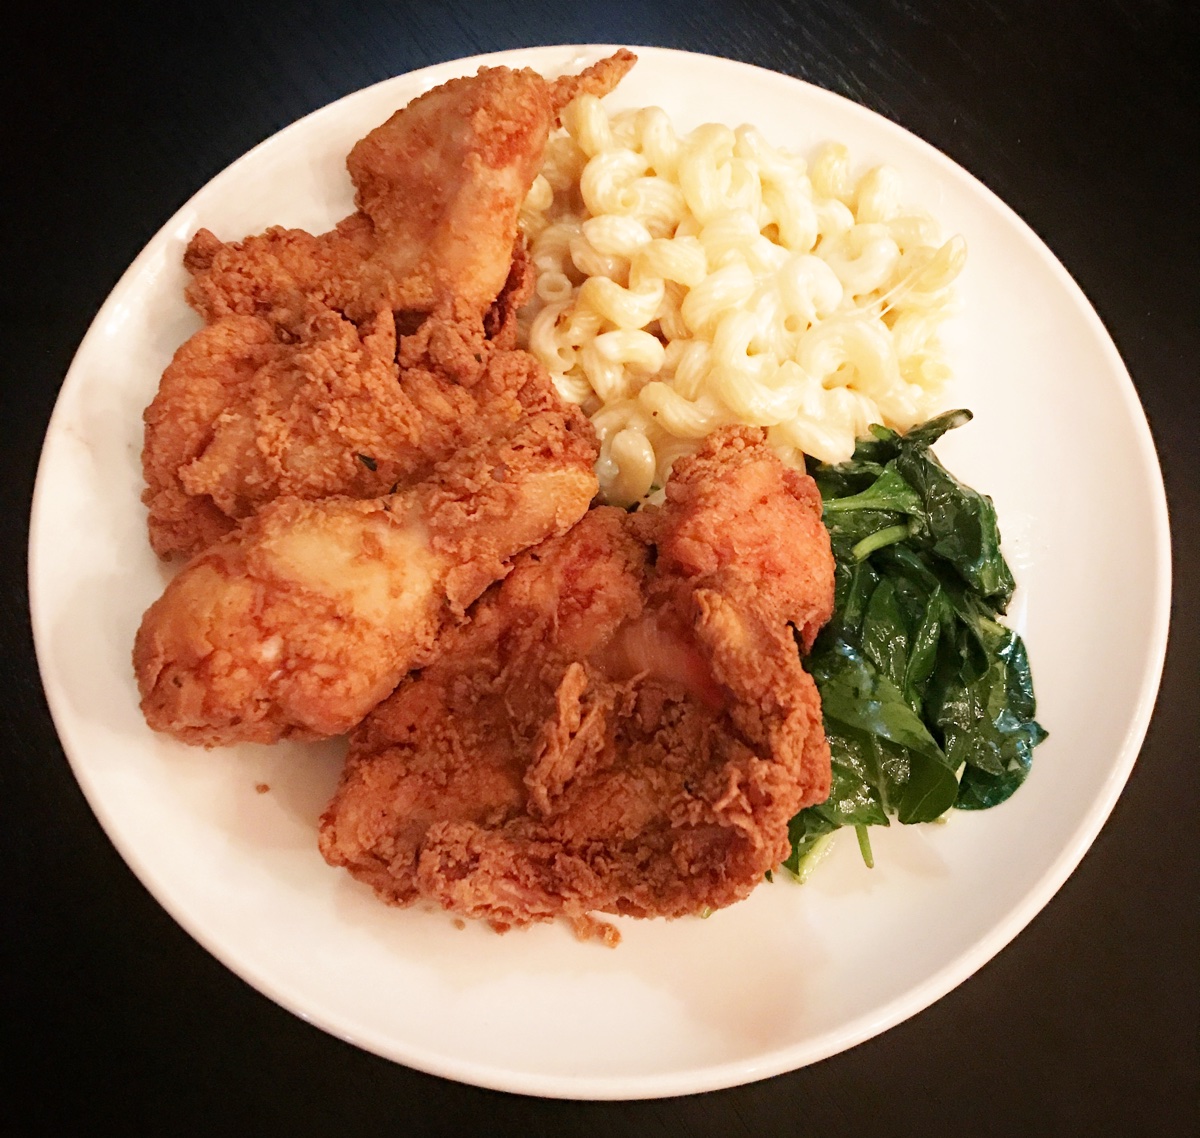 Fried Chicken is one of several late-night menu items now available at the Independent